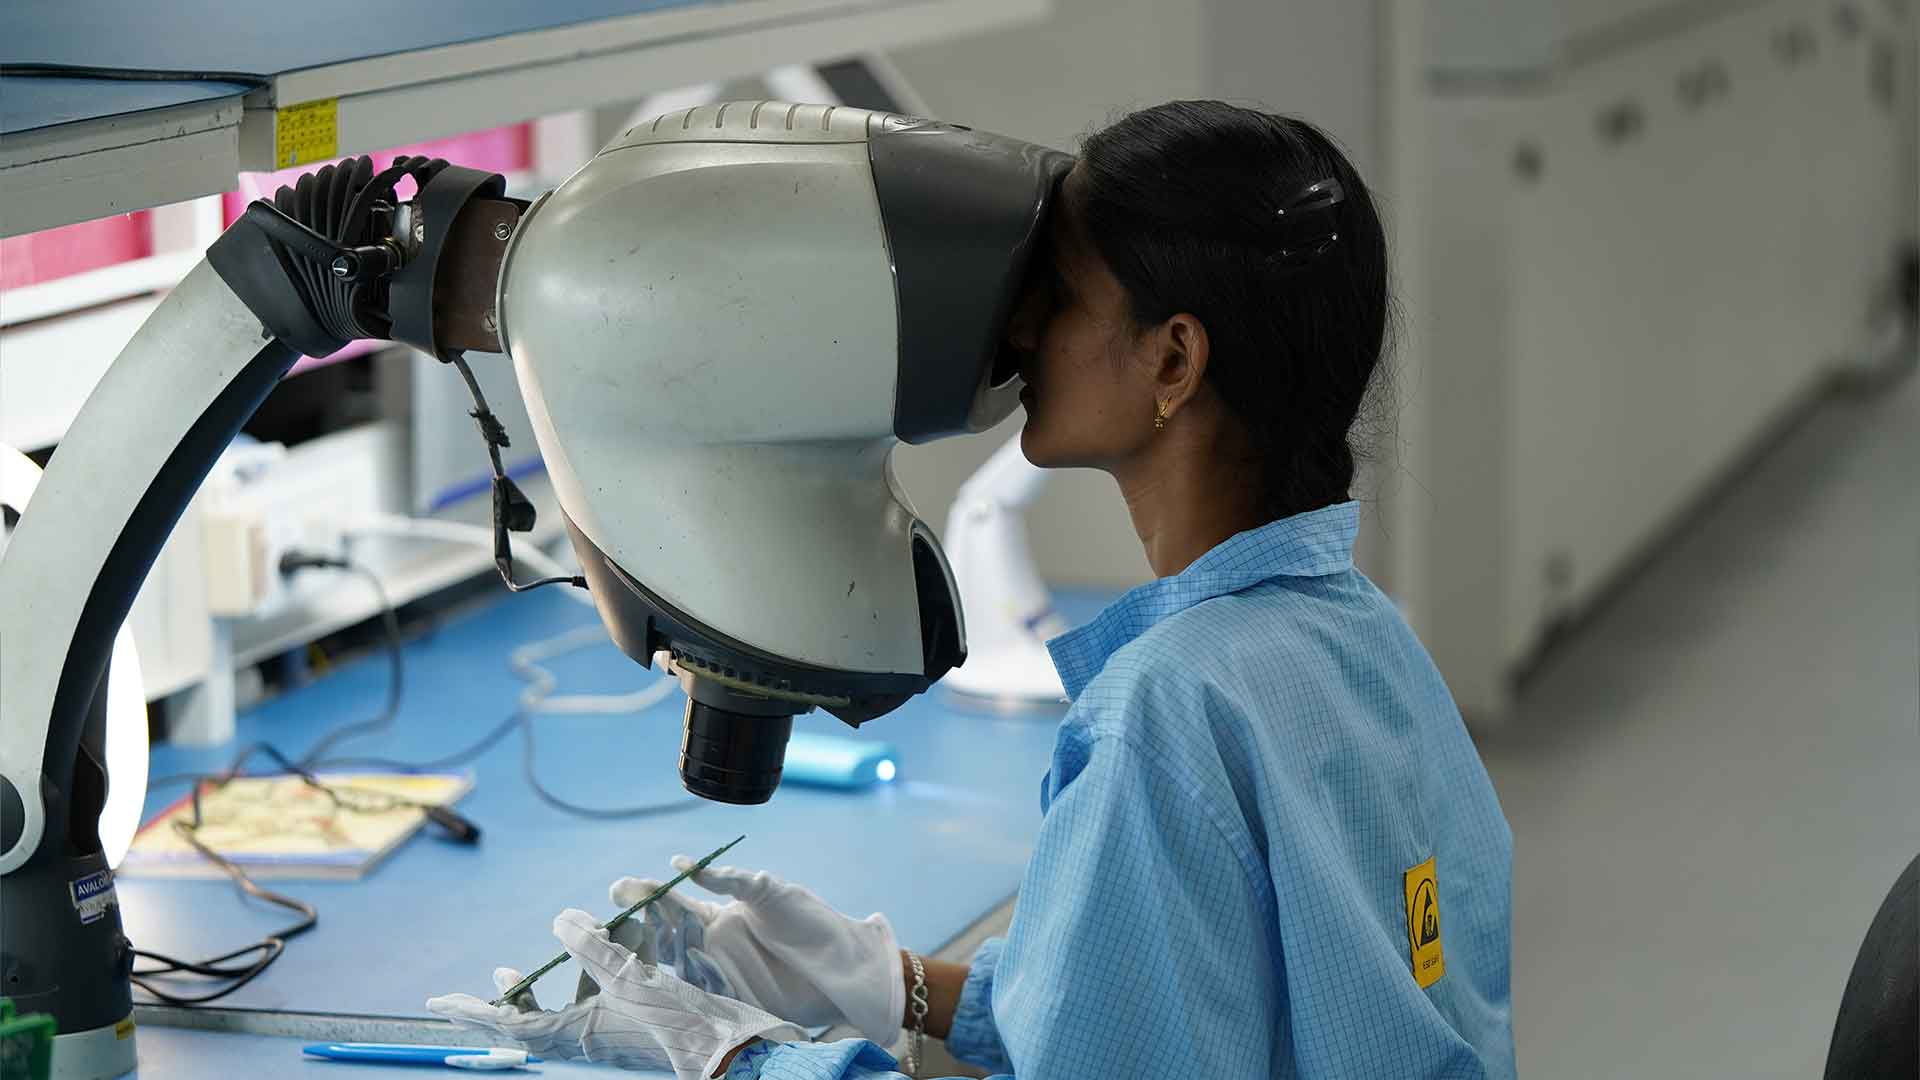 A technician in a light blue lab coat is closely examining a component through a large, professional microscope in an electronic manufacturing service lab.